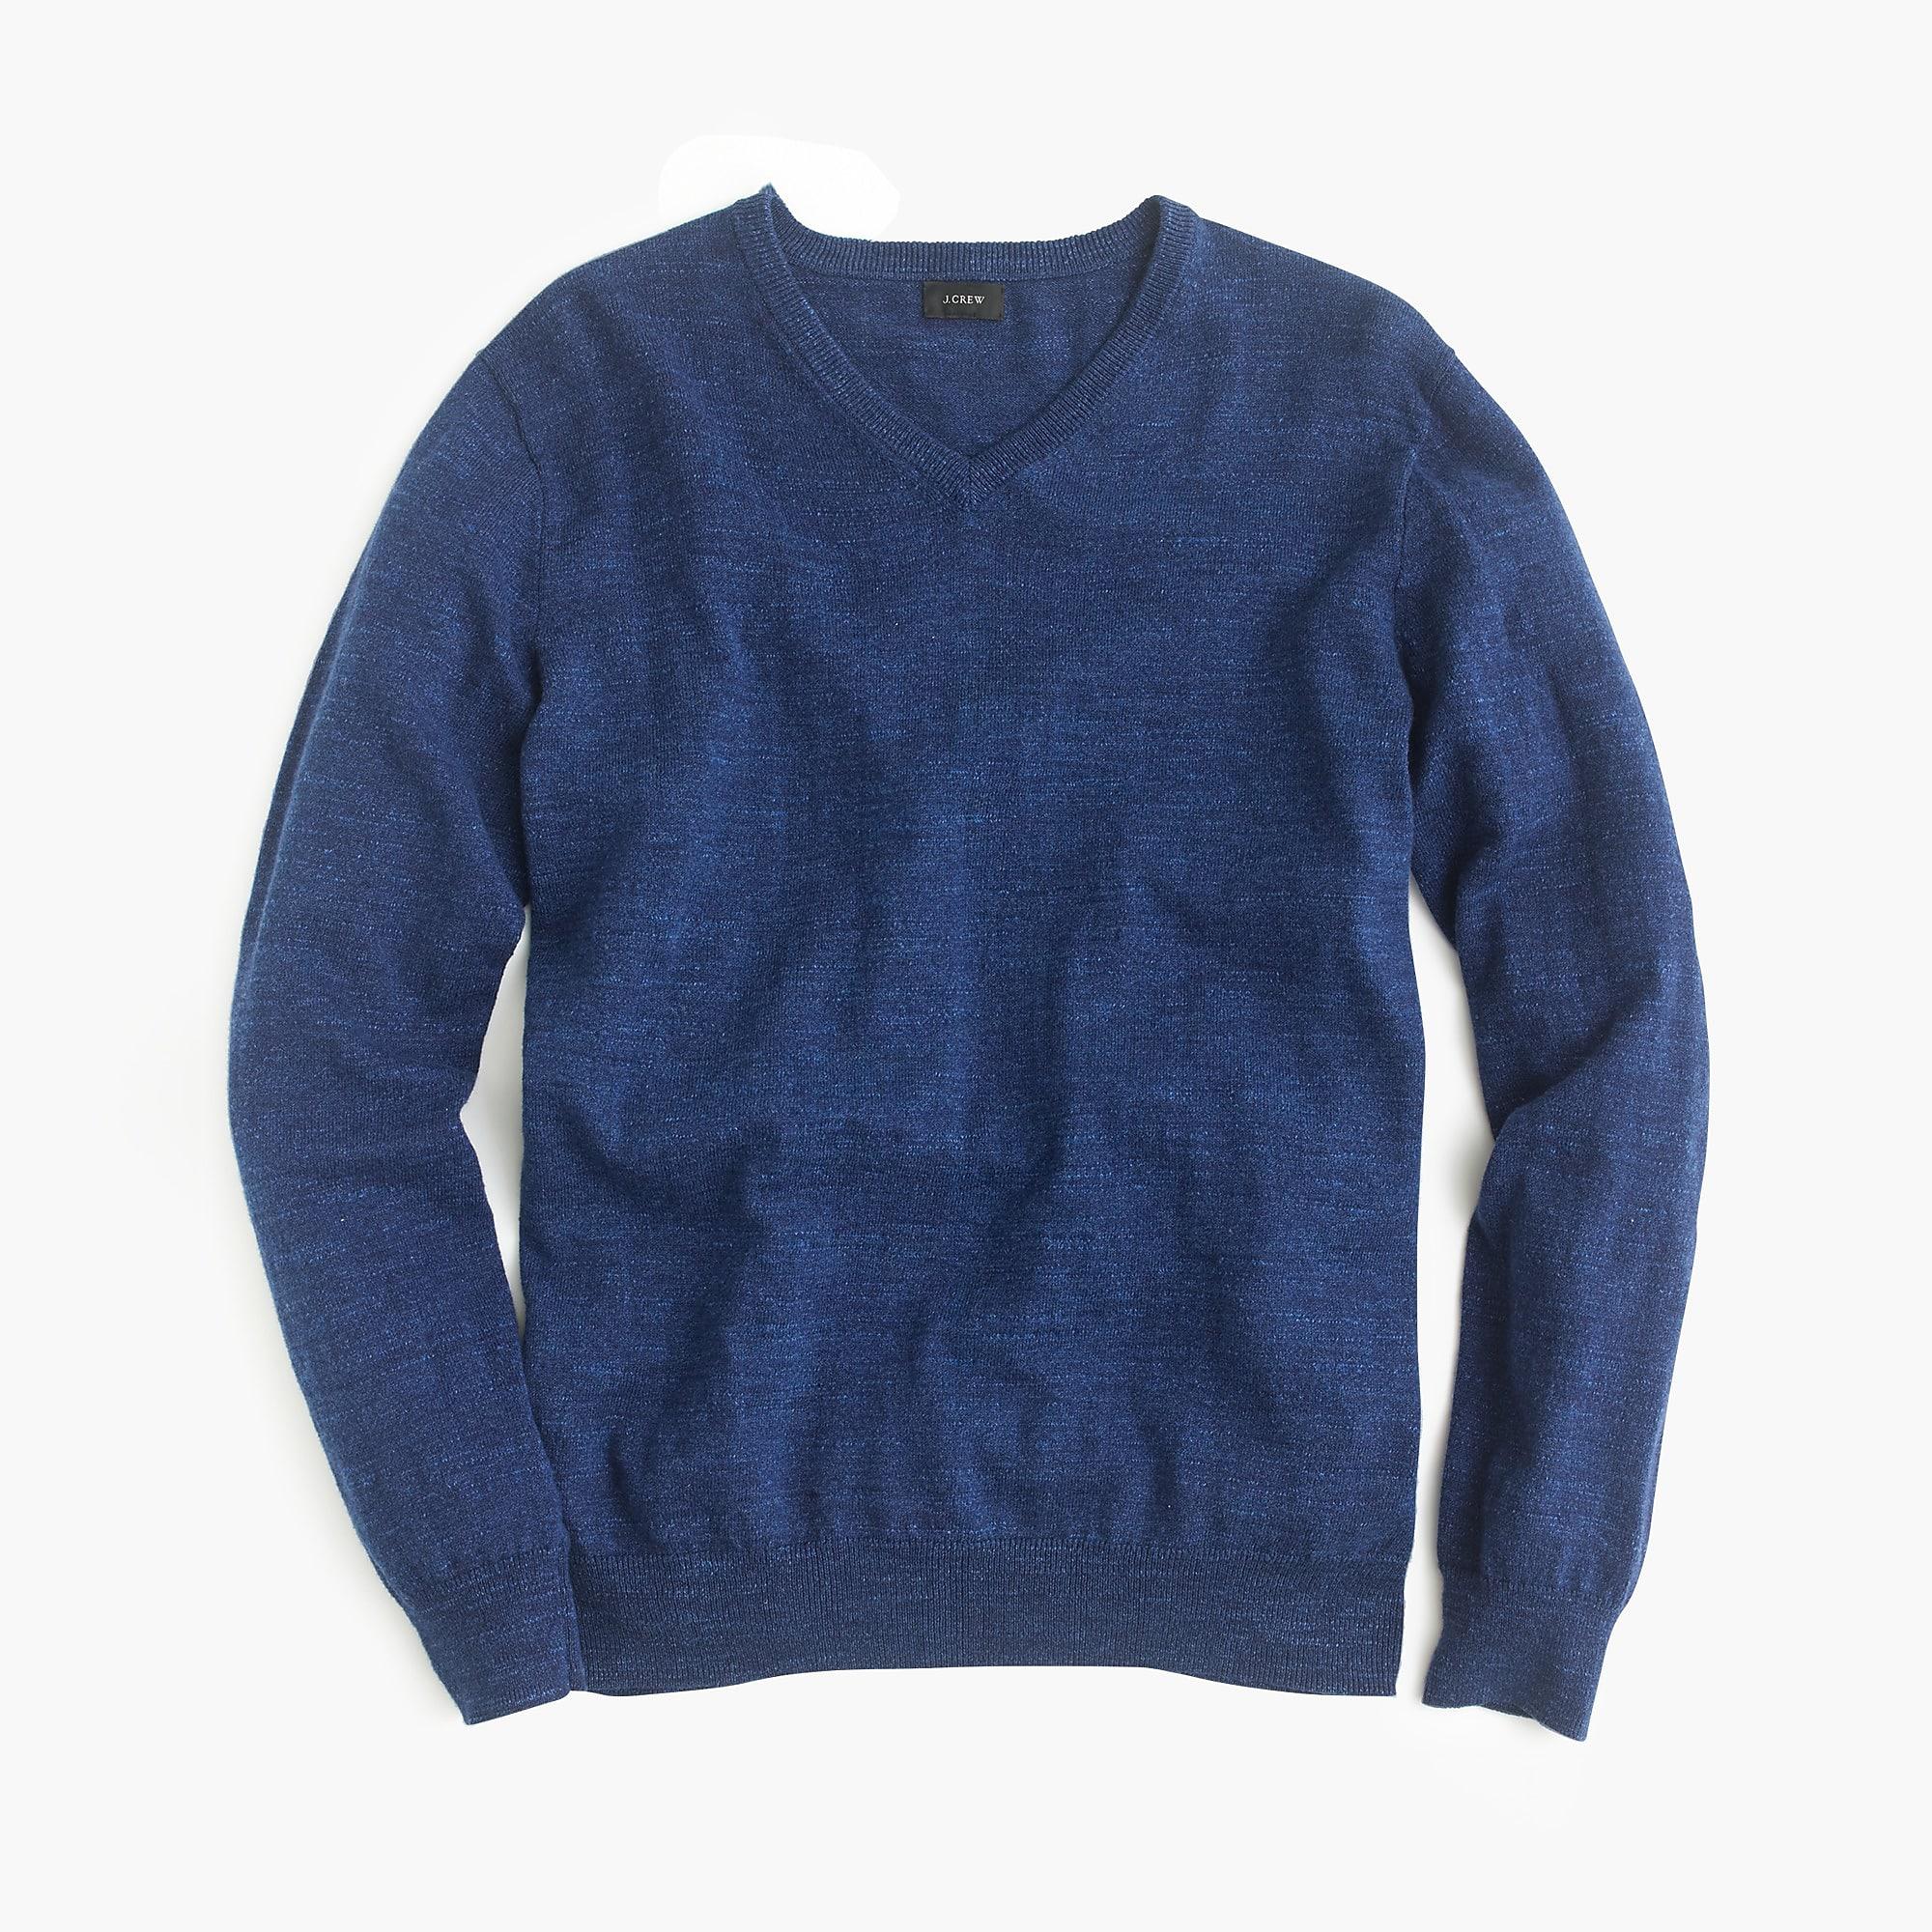 J.Crew Rugged Cotton V-neck Sweater in Blue for Men - Lyst